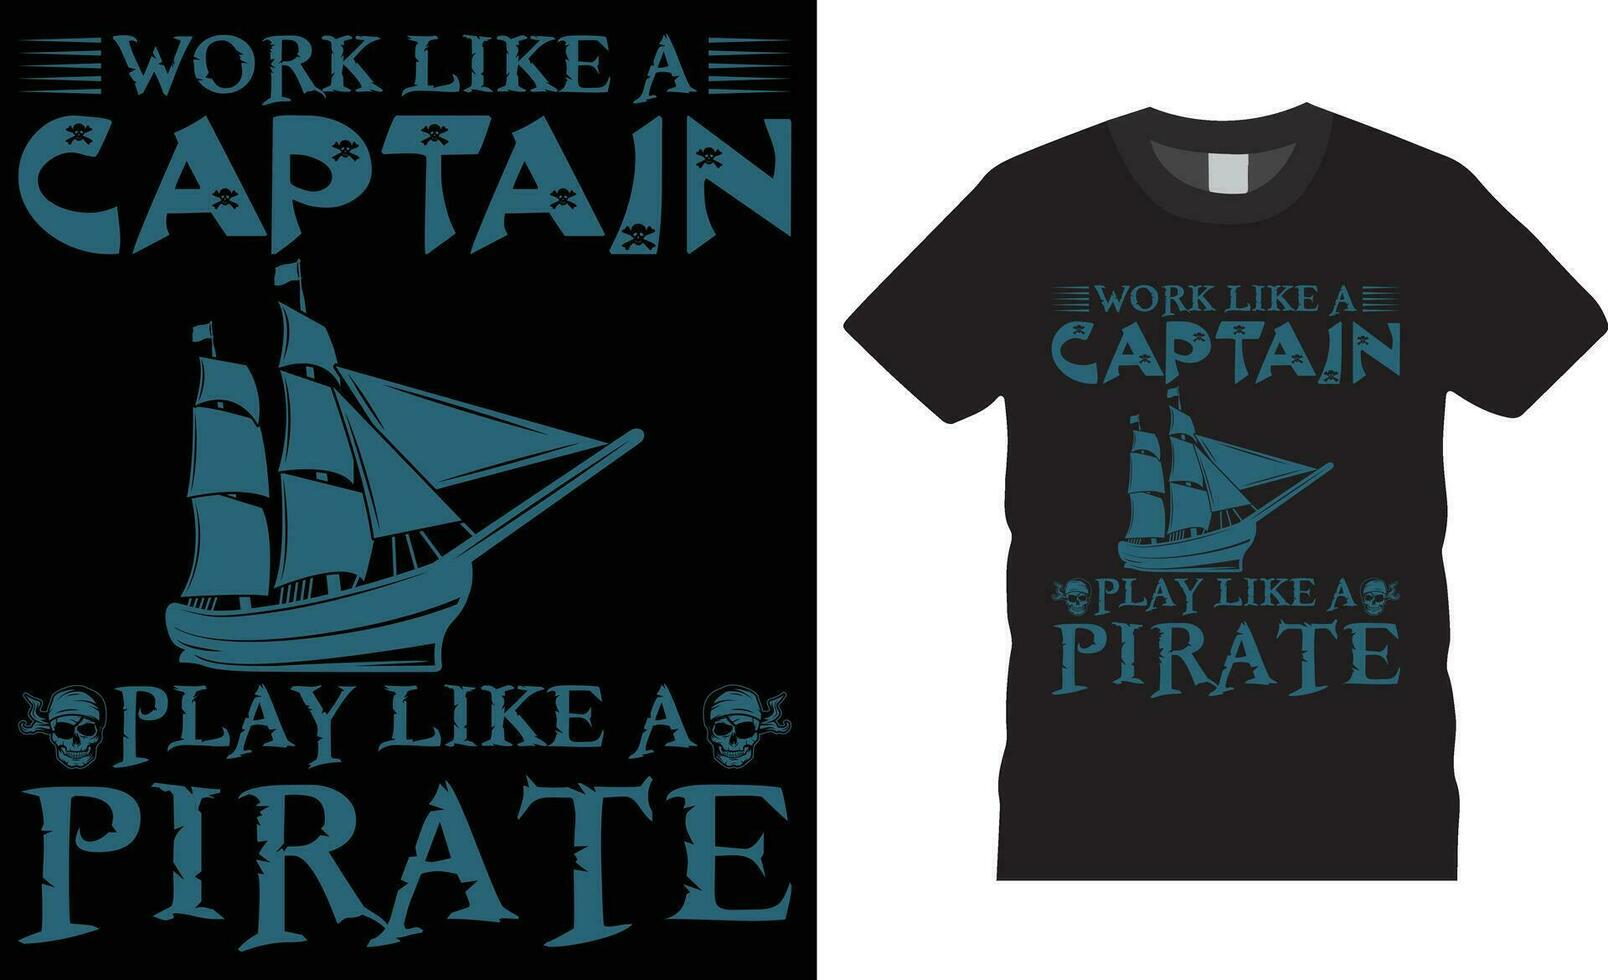 Talk like a pirate day Typography T Shirt Design vector Print for t shirt.Work like a captain play like a pirate